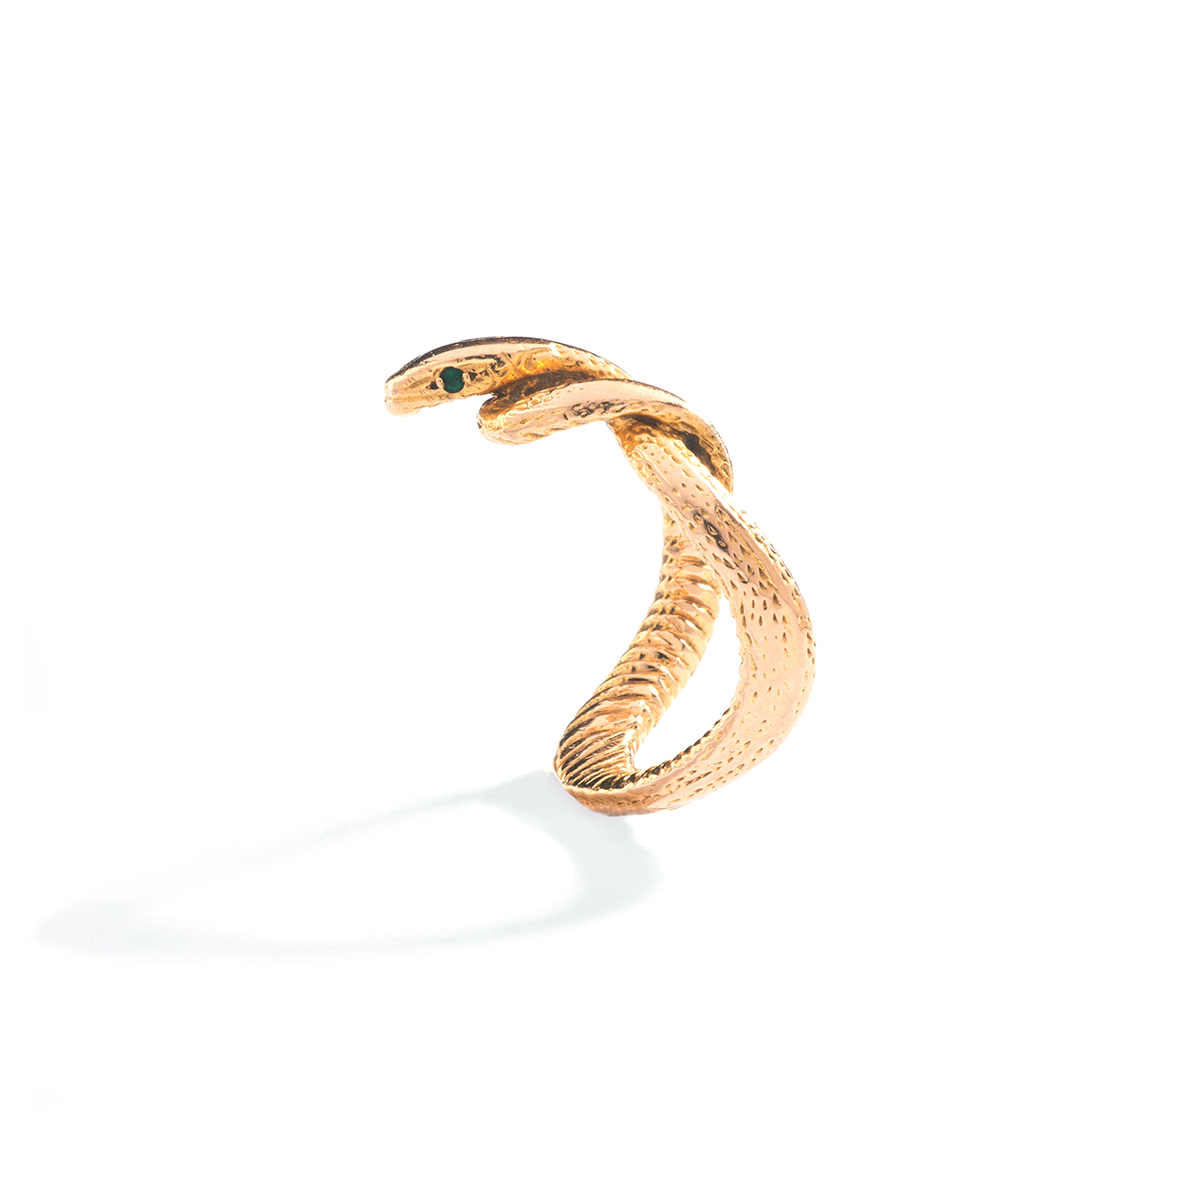 Antique yellow gold snake ring